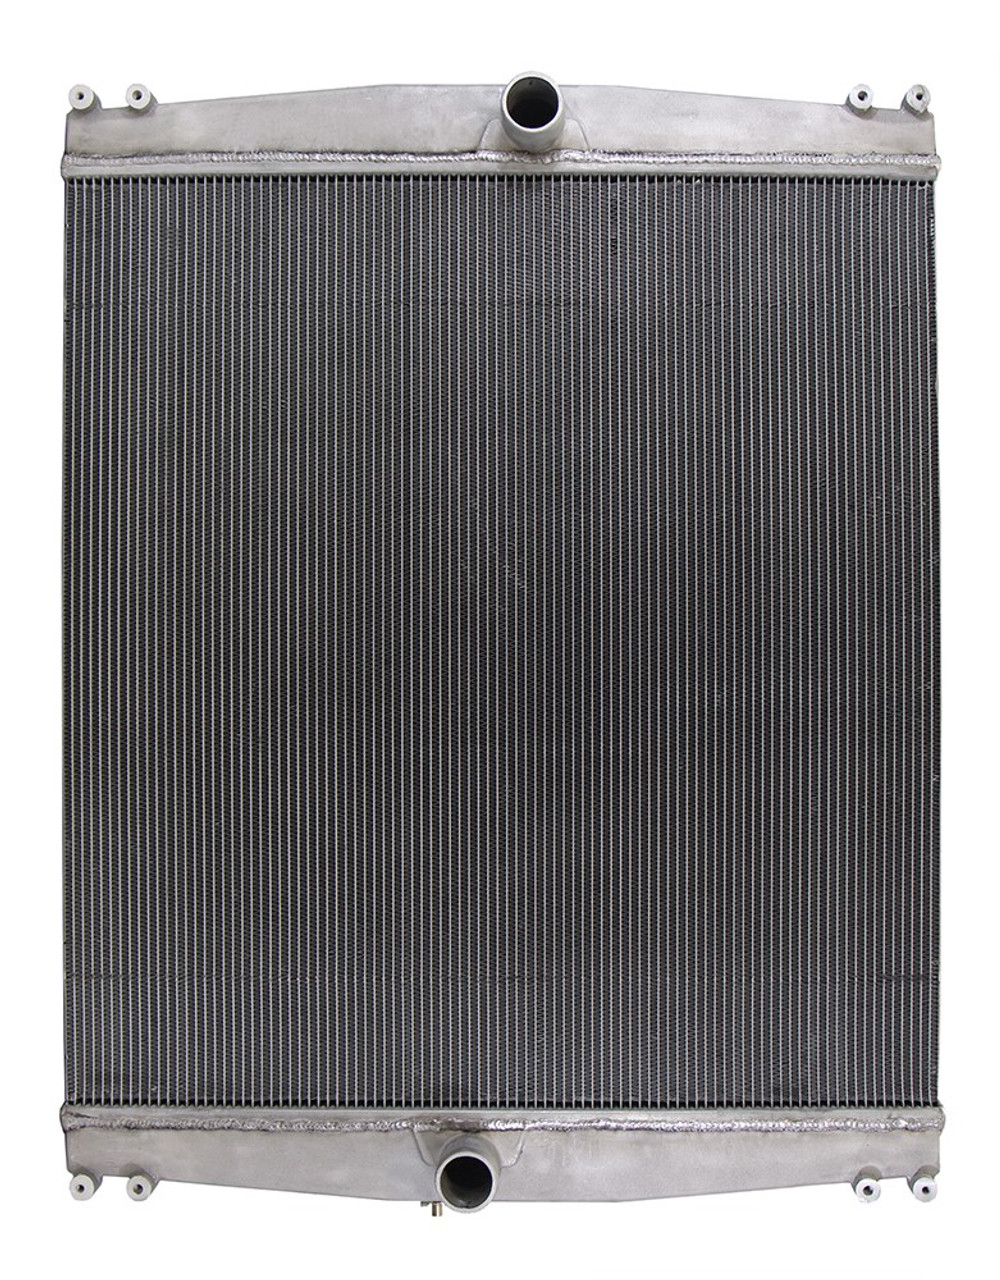 New Replacement Radiator for John Deere Tractor 9000 Series RE159211  RE169273 (24159) ***SHIPS FREIGHT***